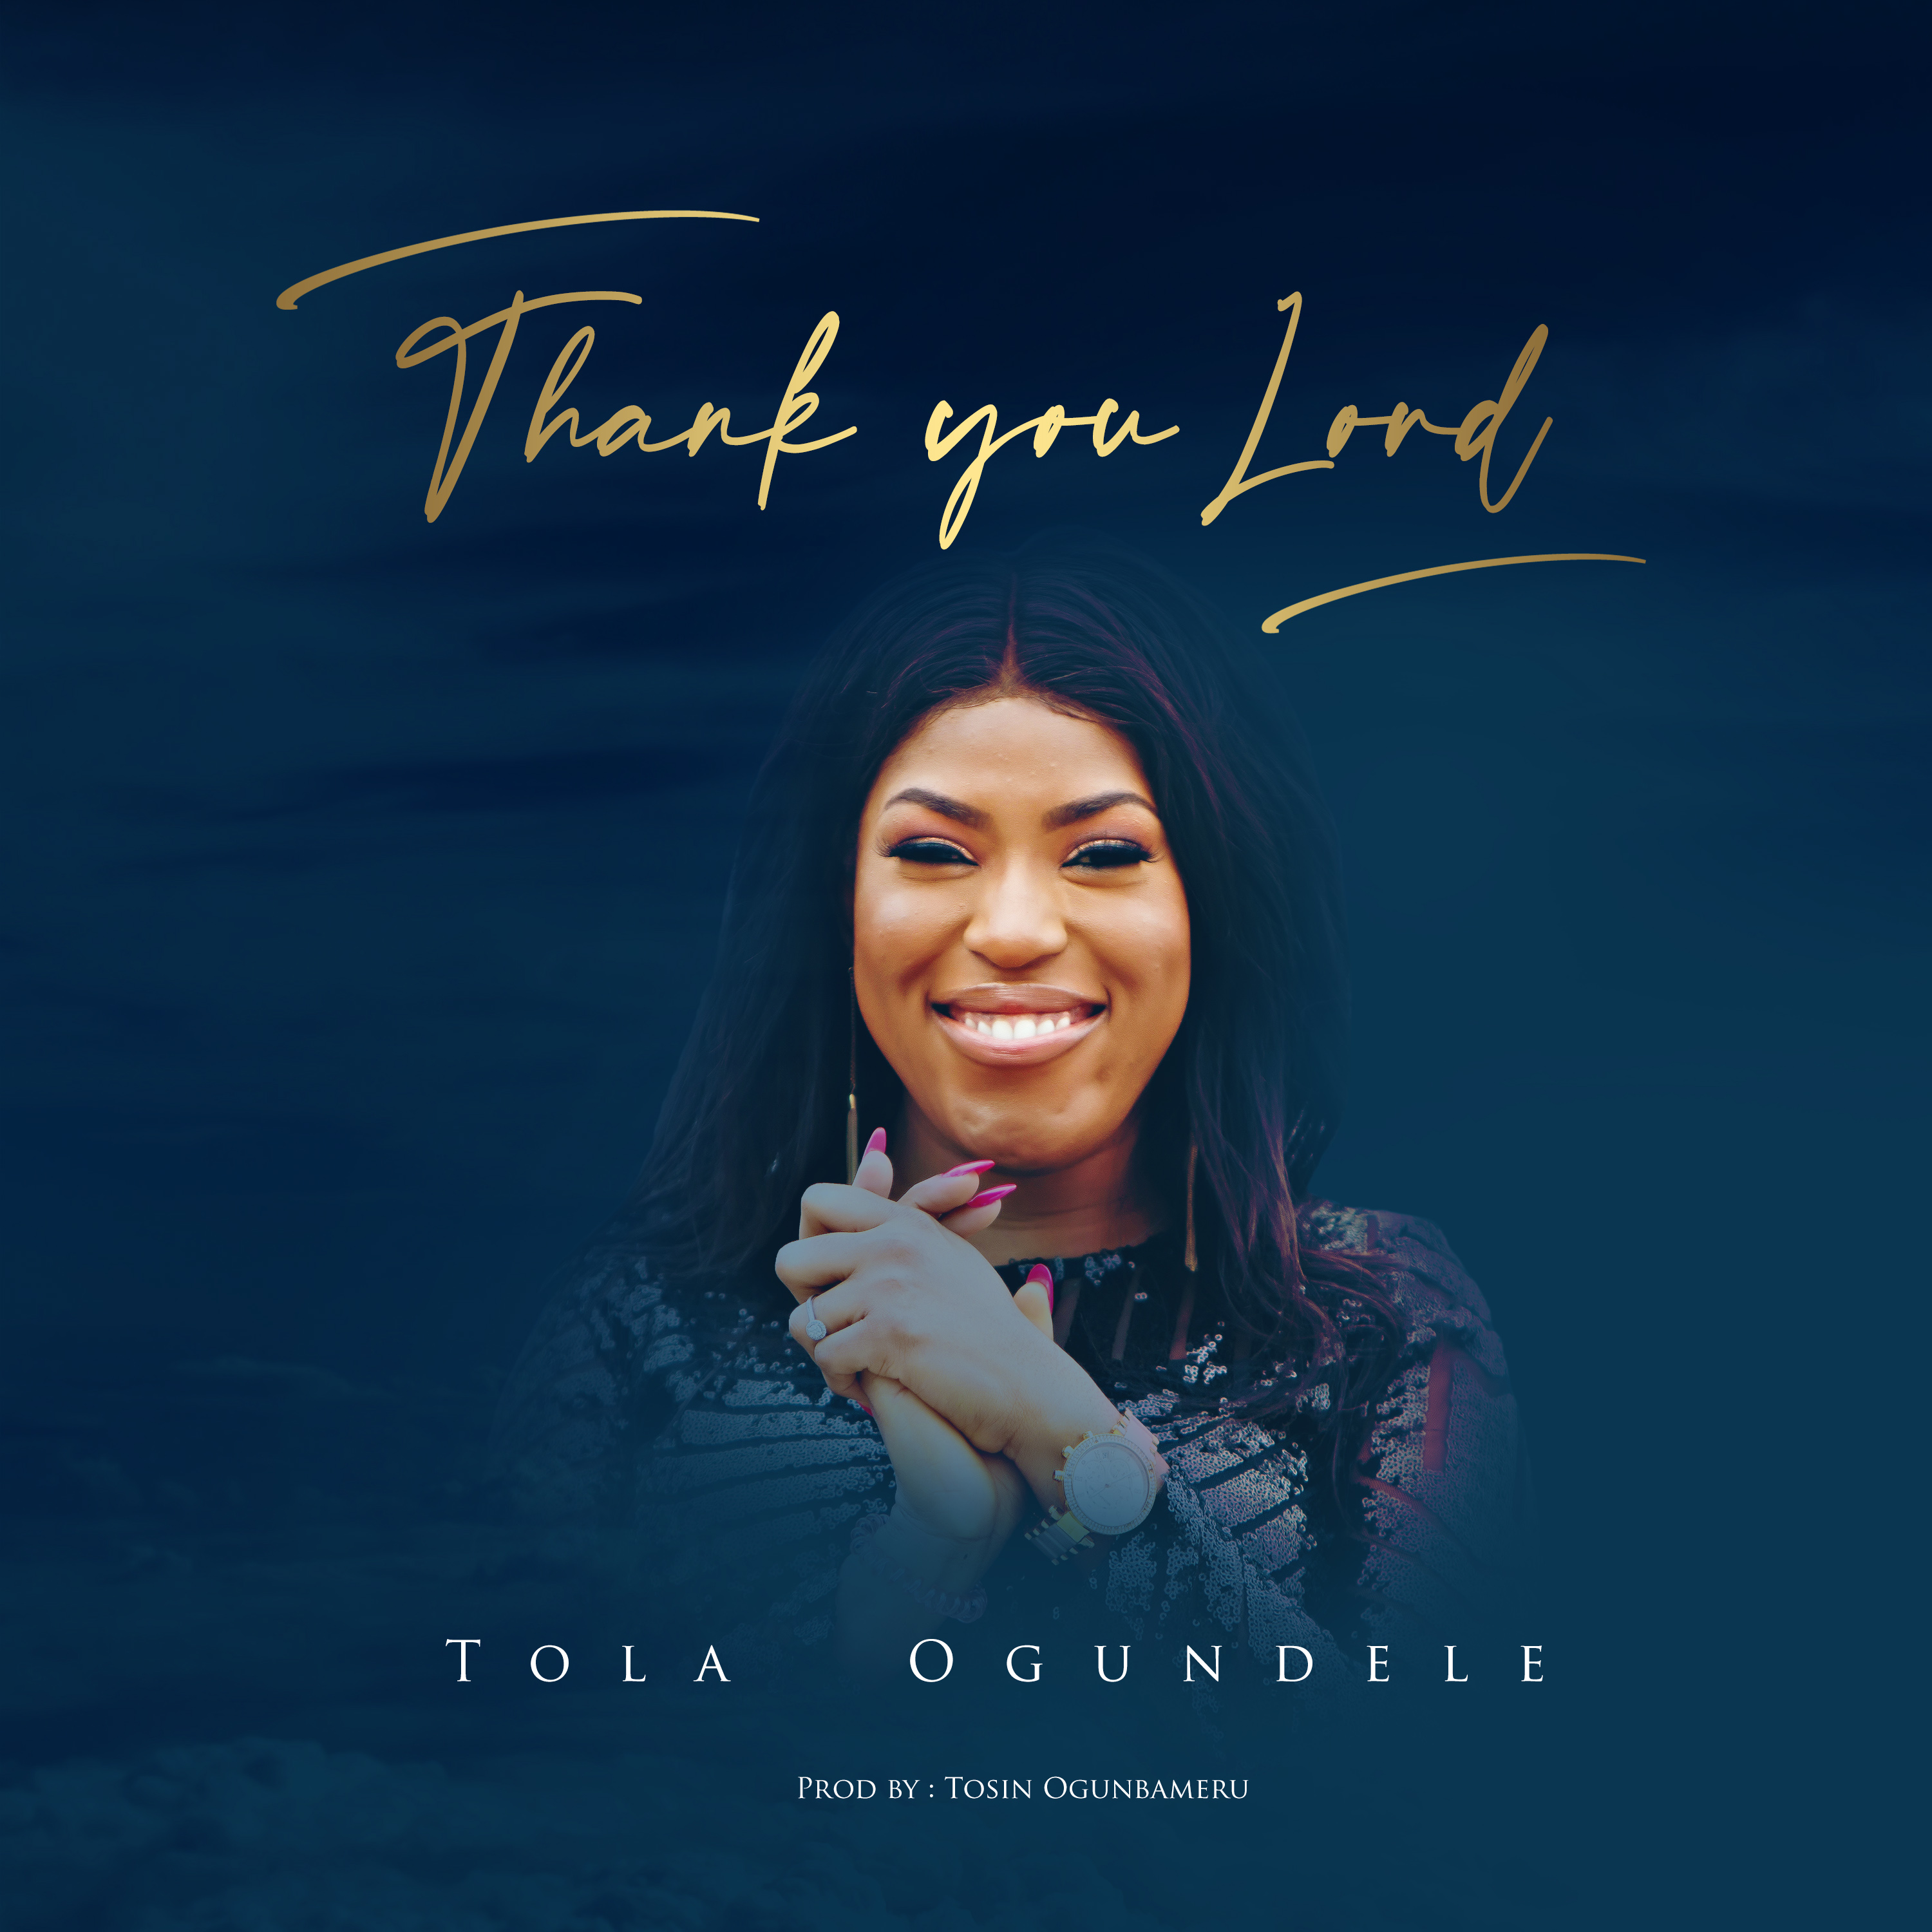 Art for Thank You Lord by Tola Ogundele